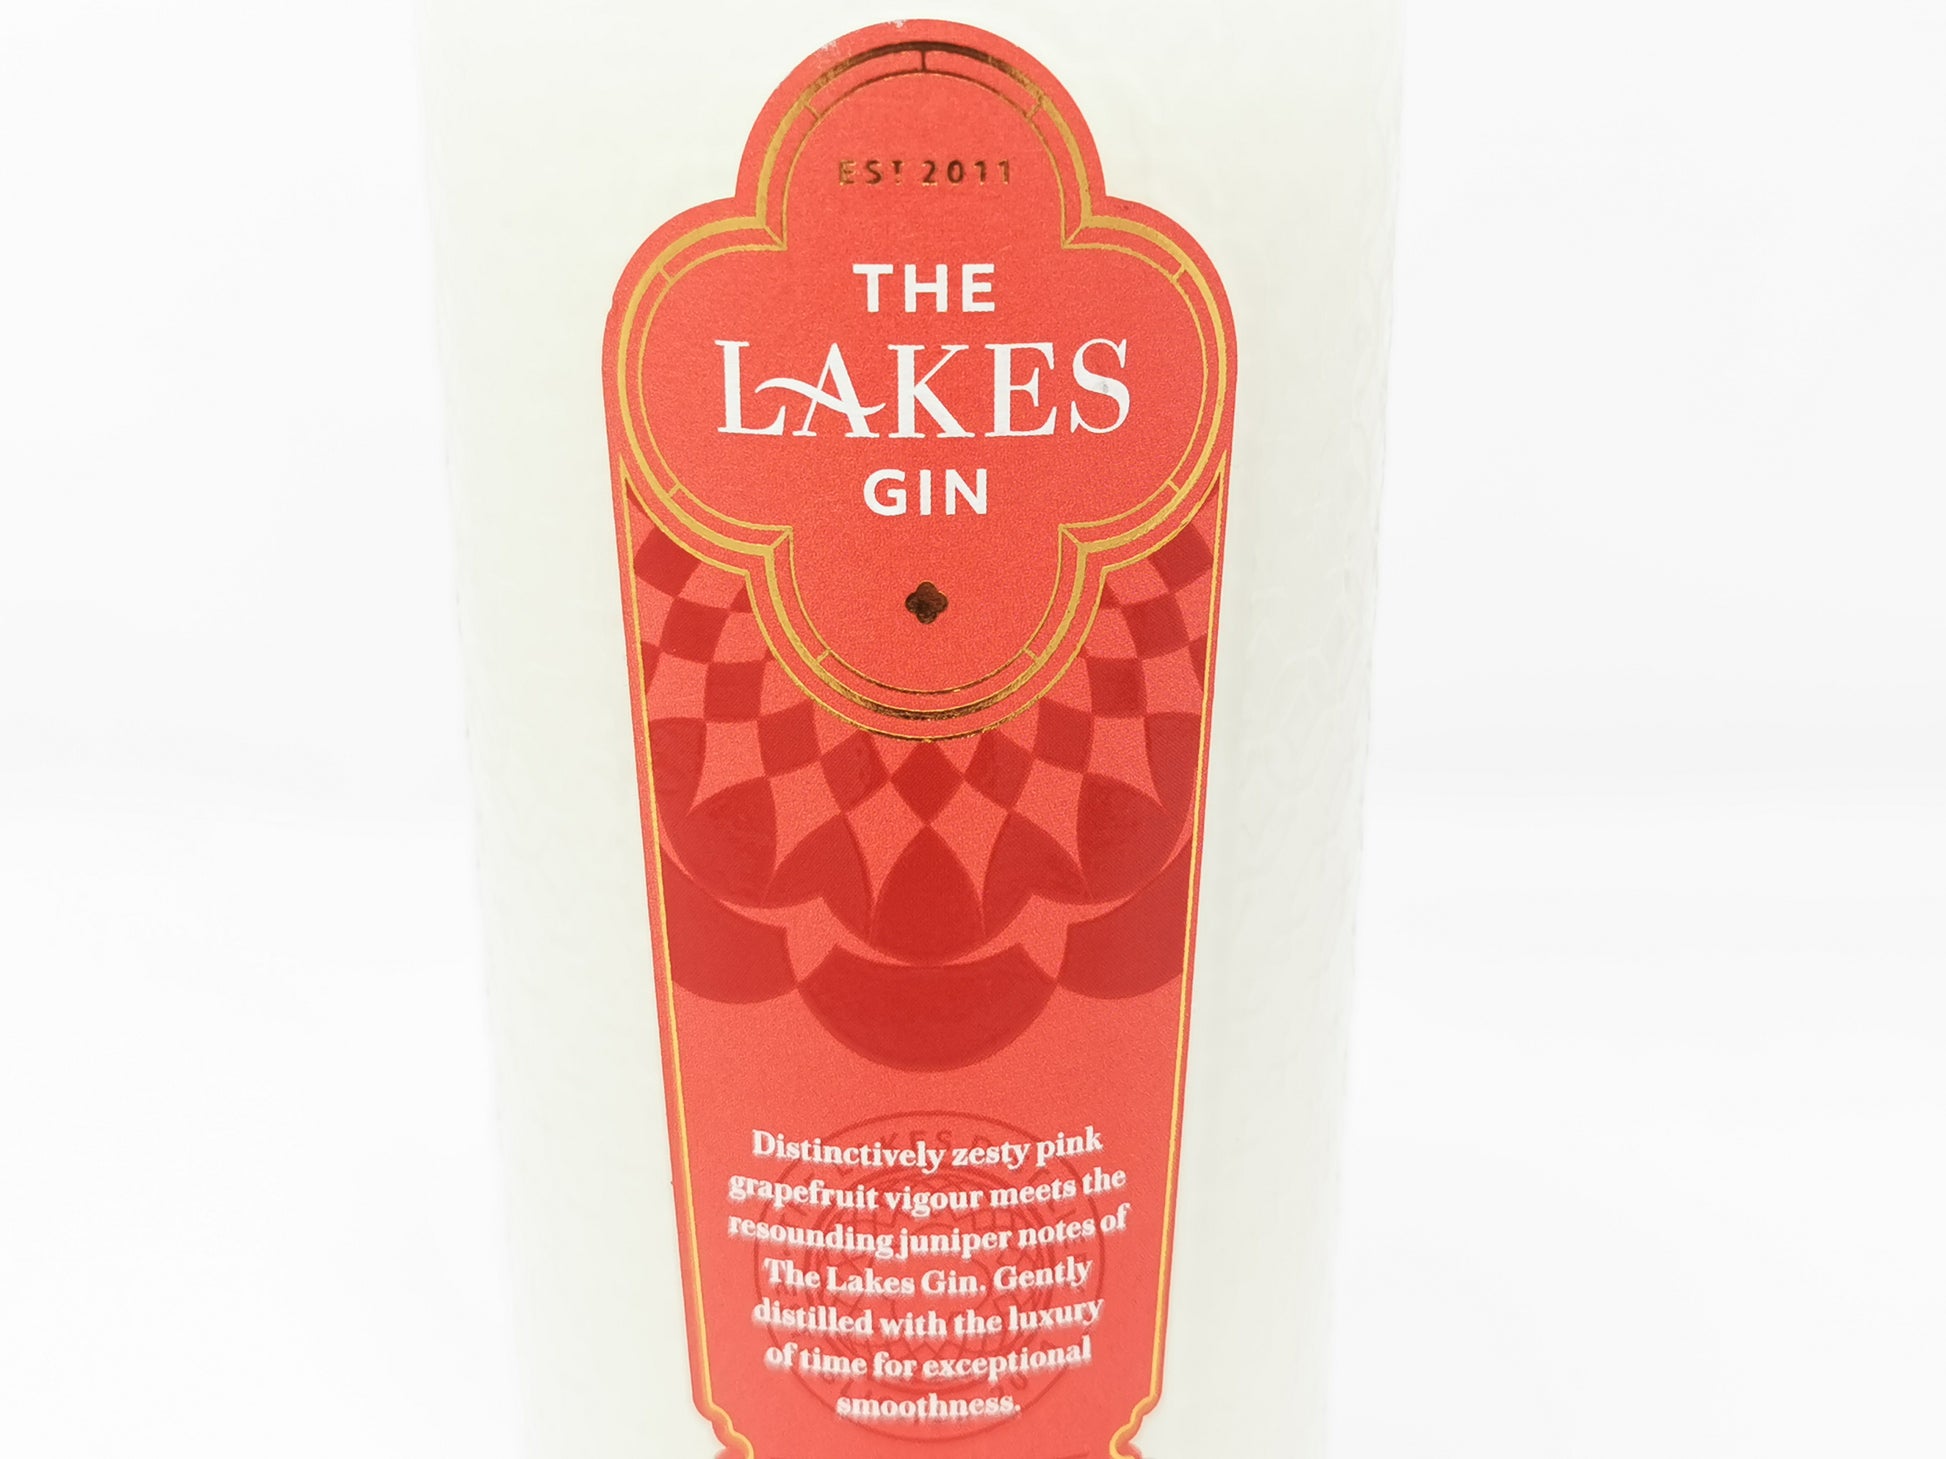 The Lakes Grapefruit Gin Bottle Candle Gin Bottle Candles Adhock Homeware